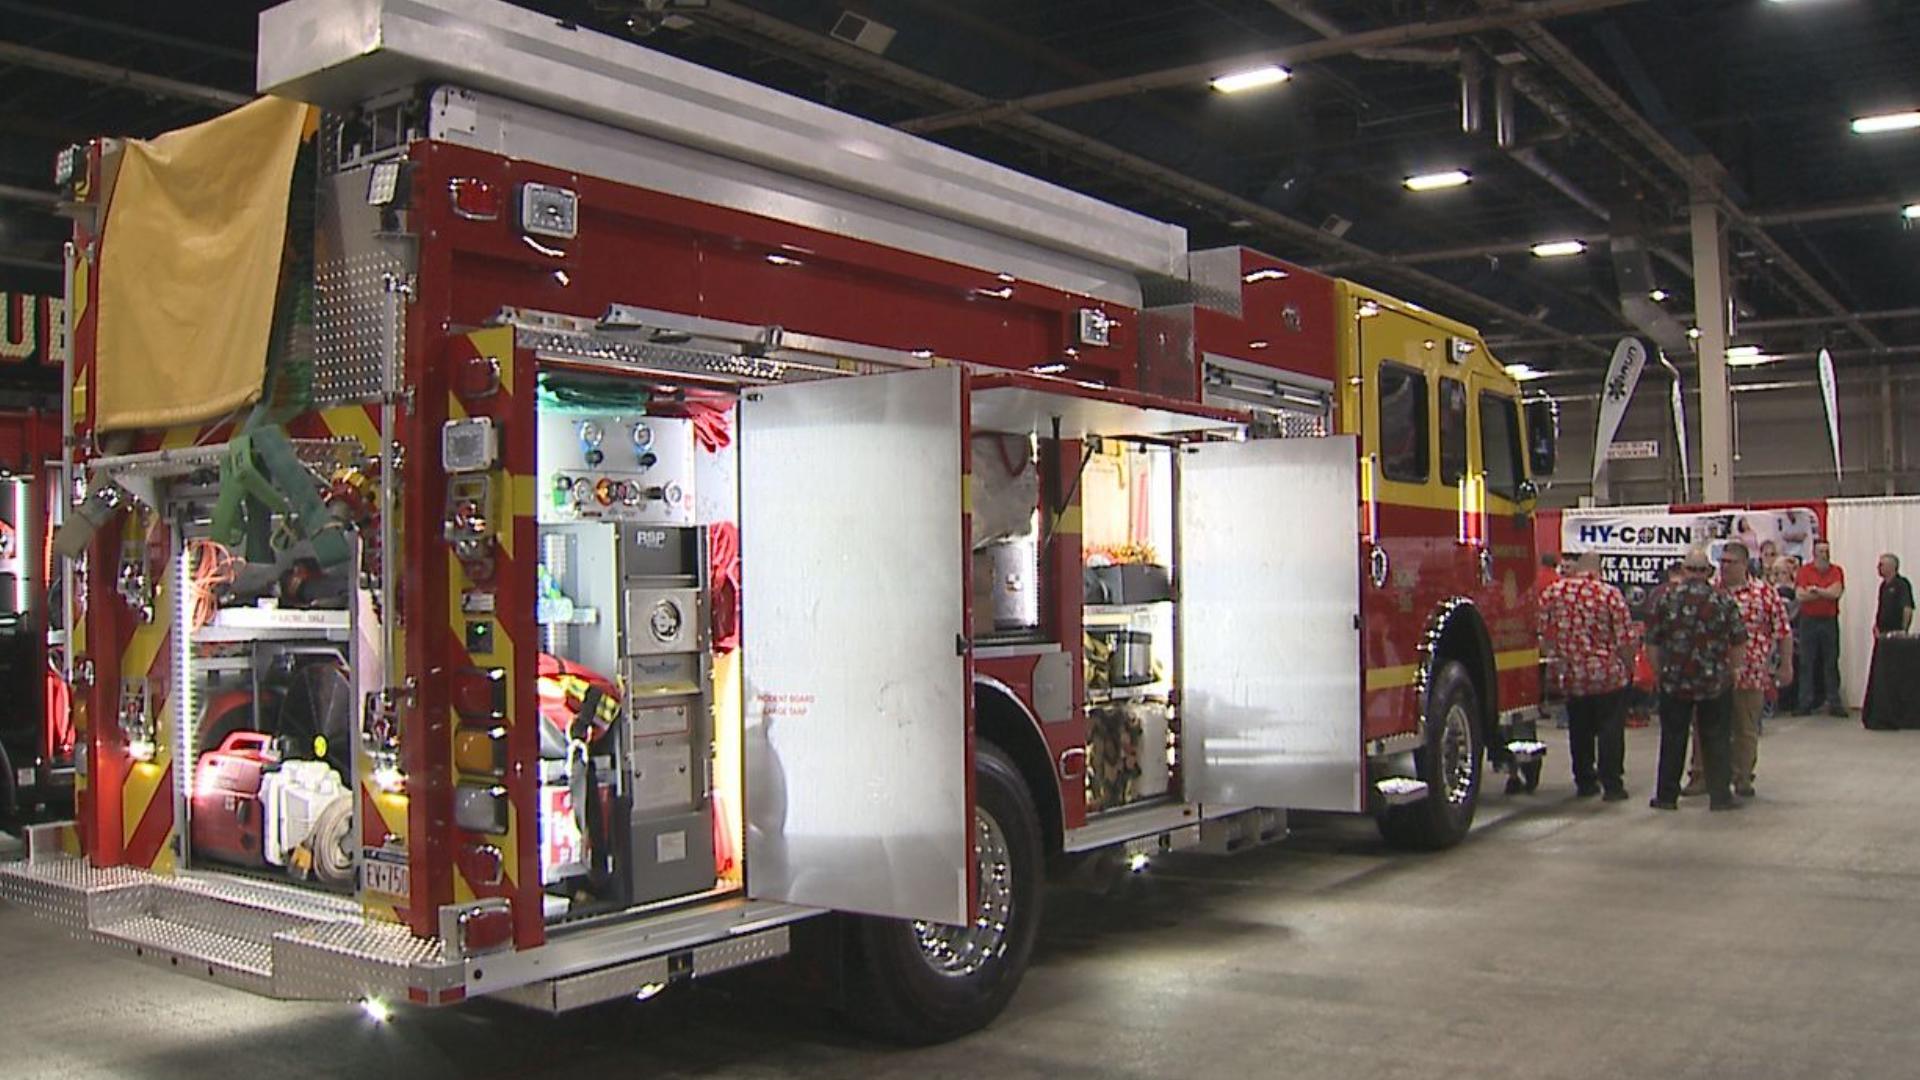 The annual FIRE EXPO is back at the Pennsylvania Farm Show & Expo Center this weekend.